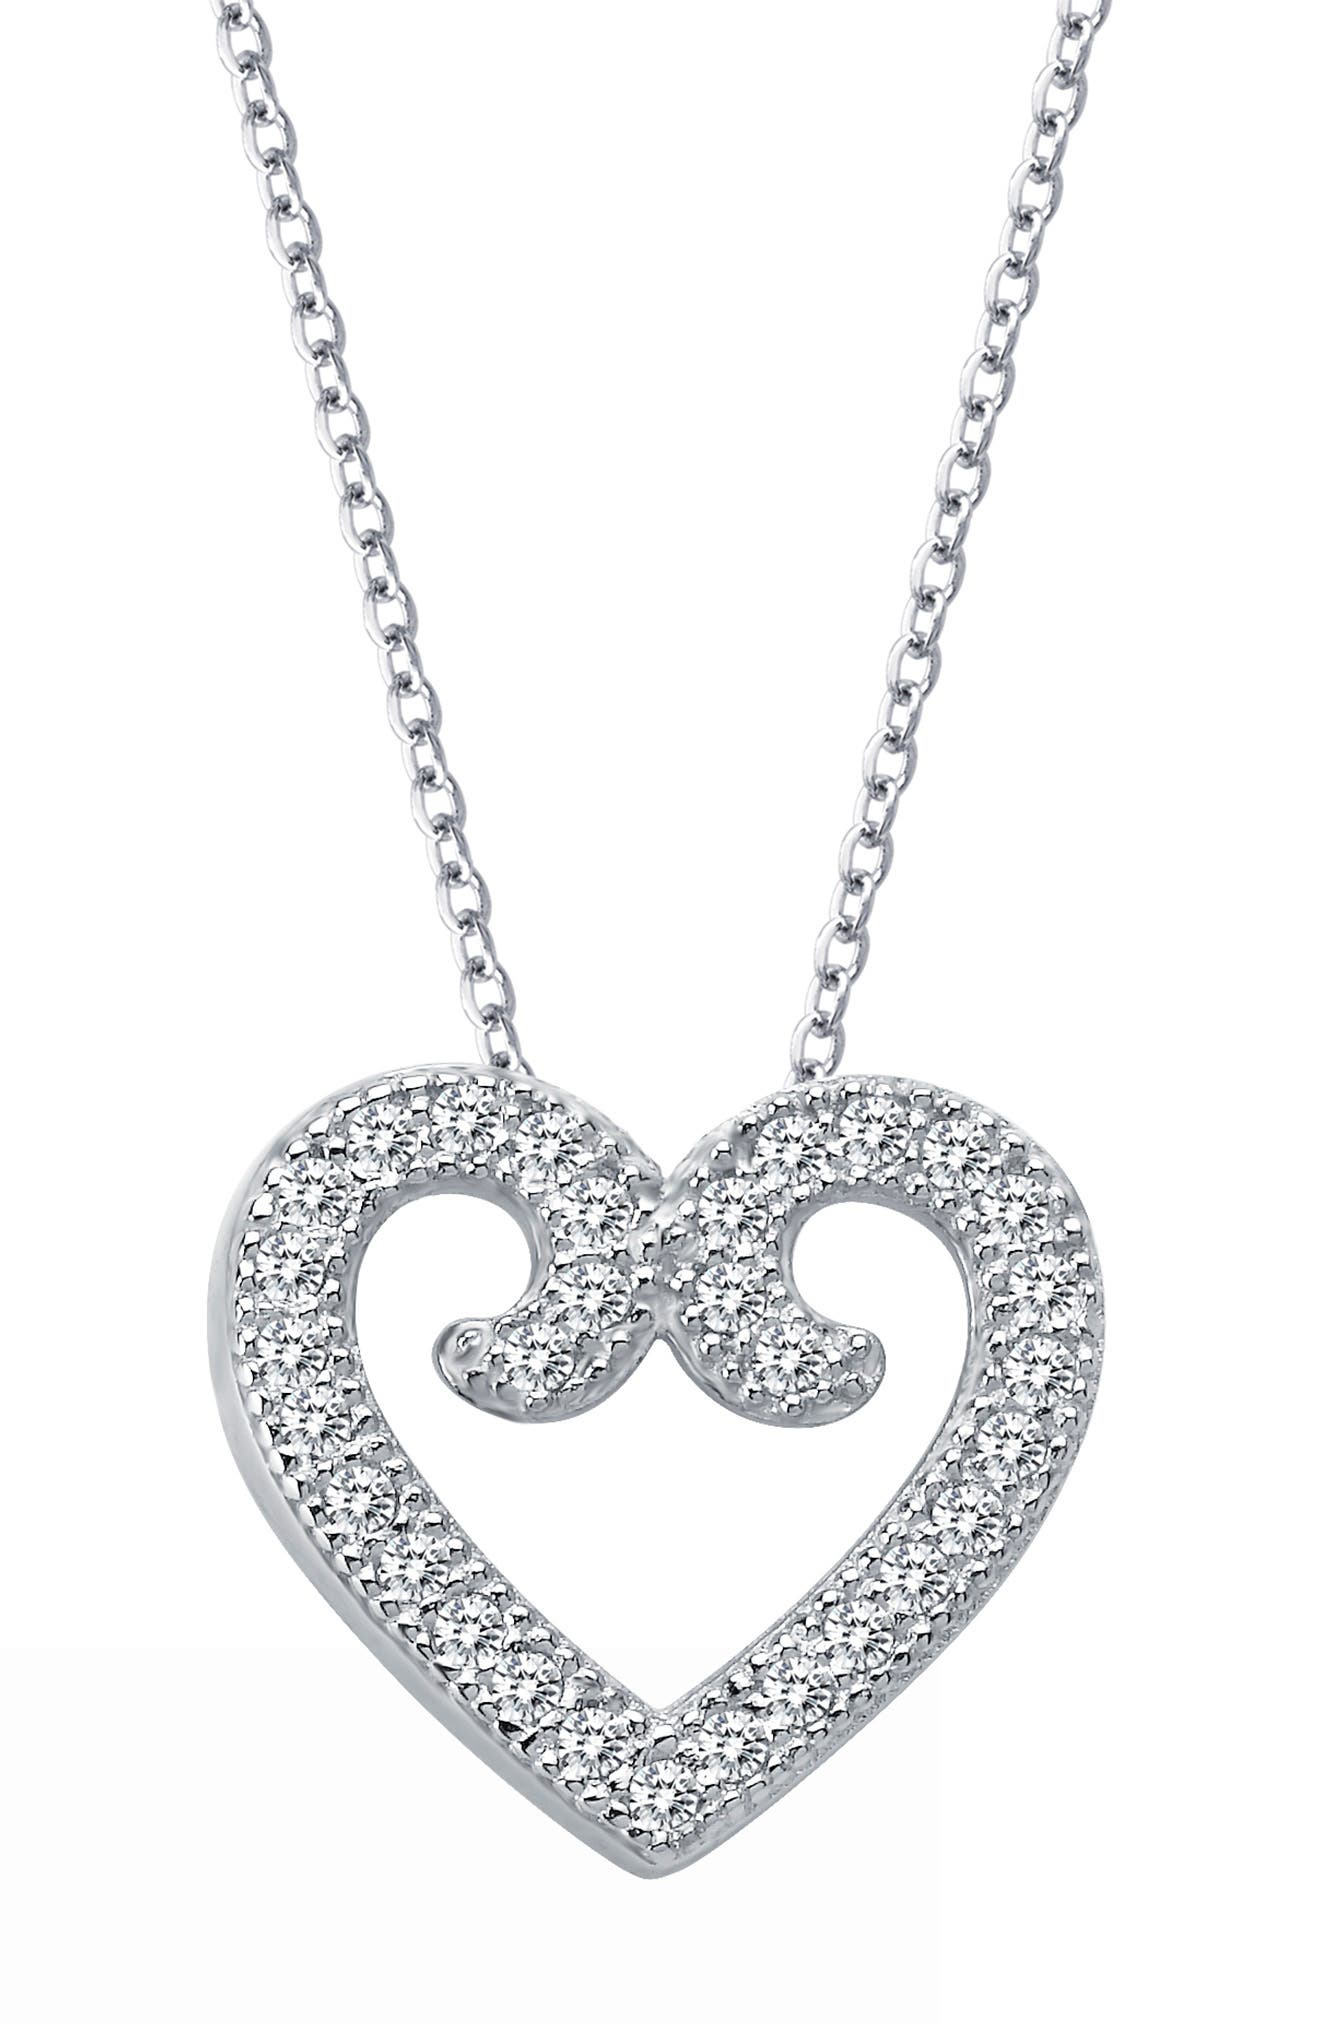 Lafonn Platinum Bonded Sterling Silver Swirl Heart Necklace In White